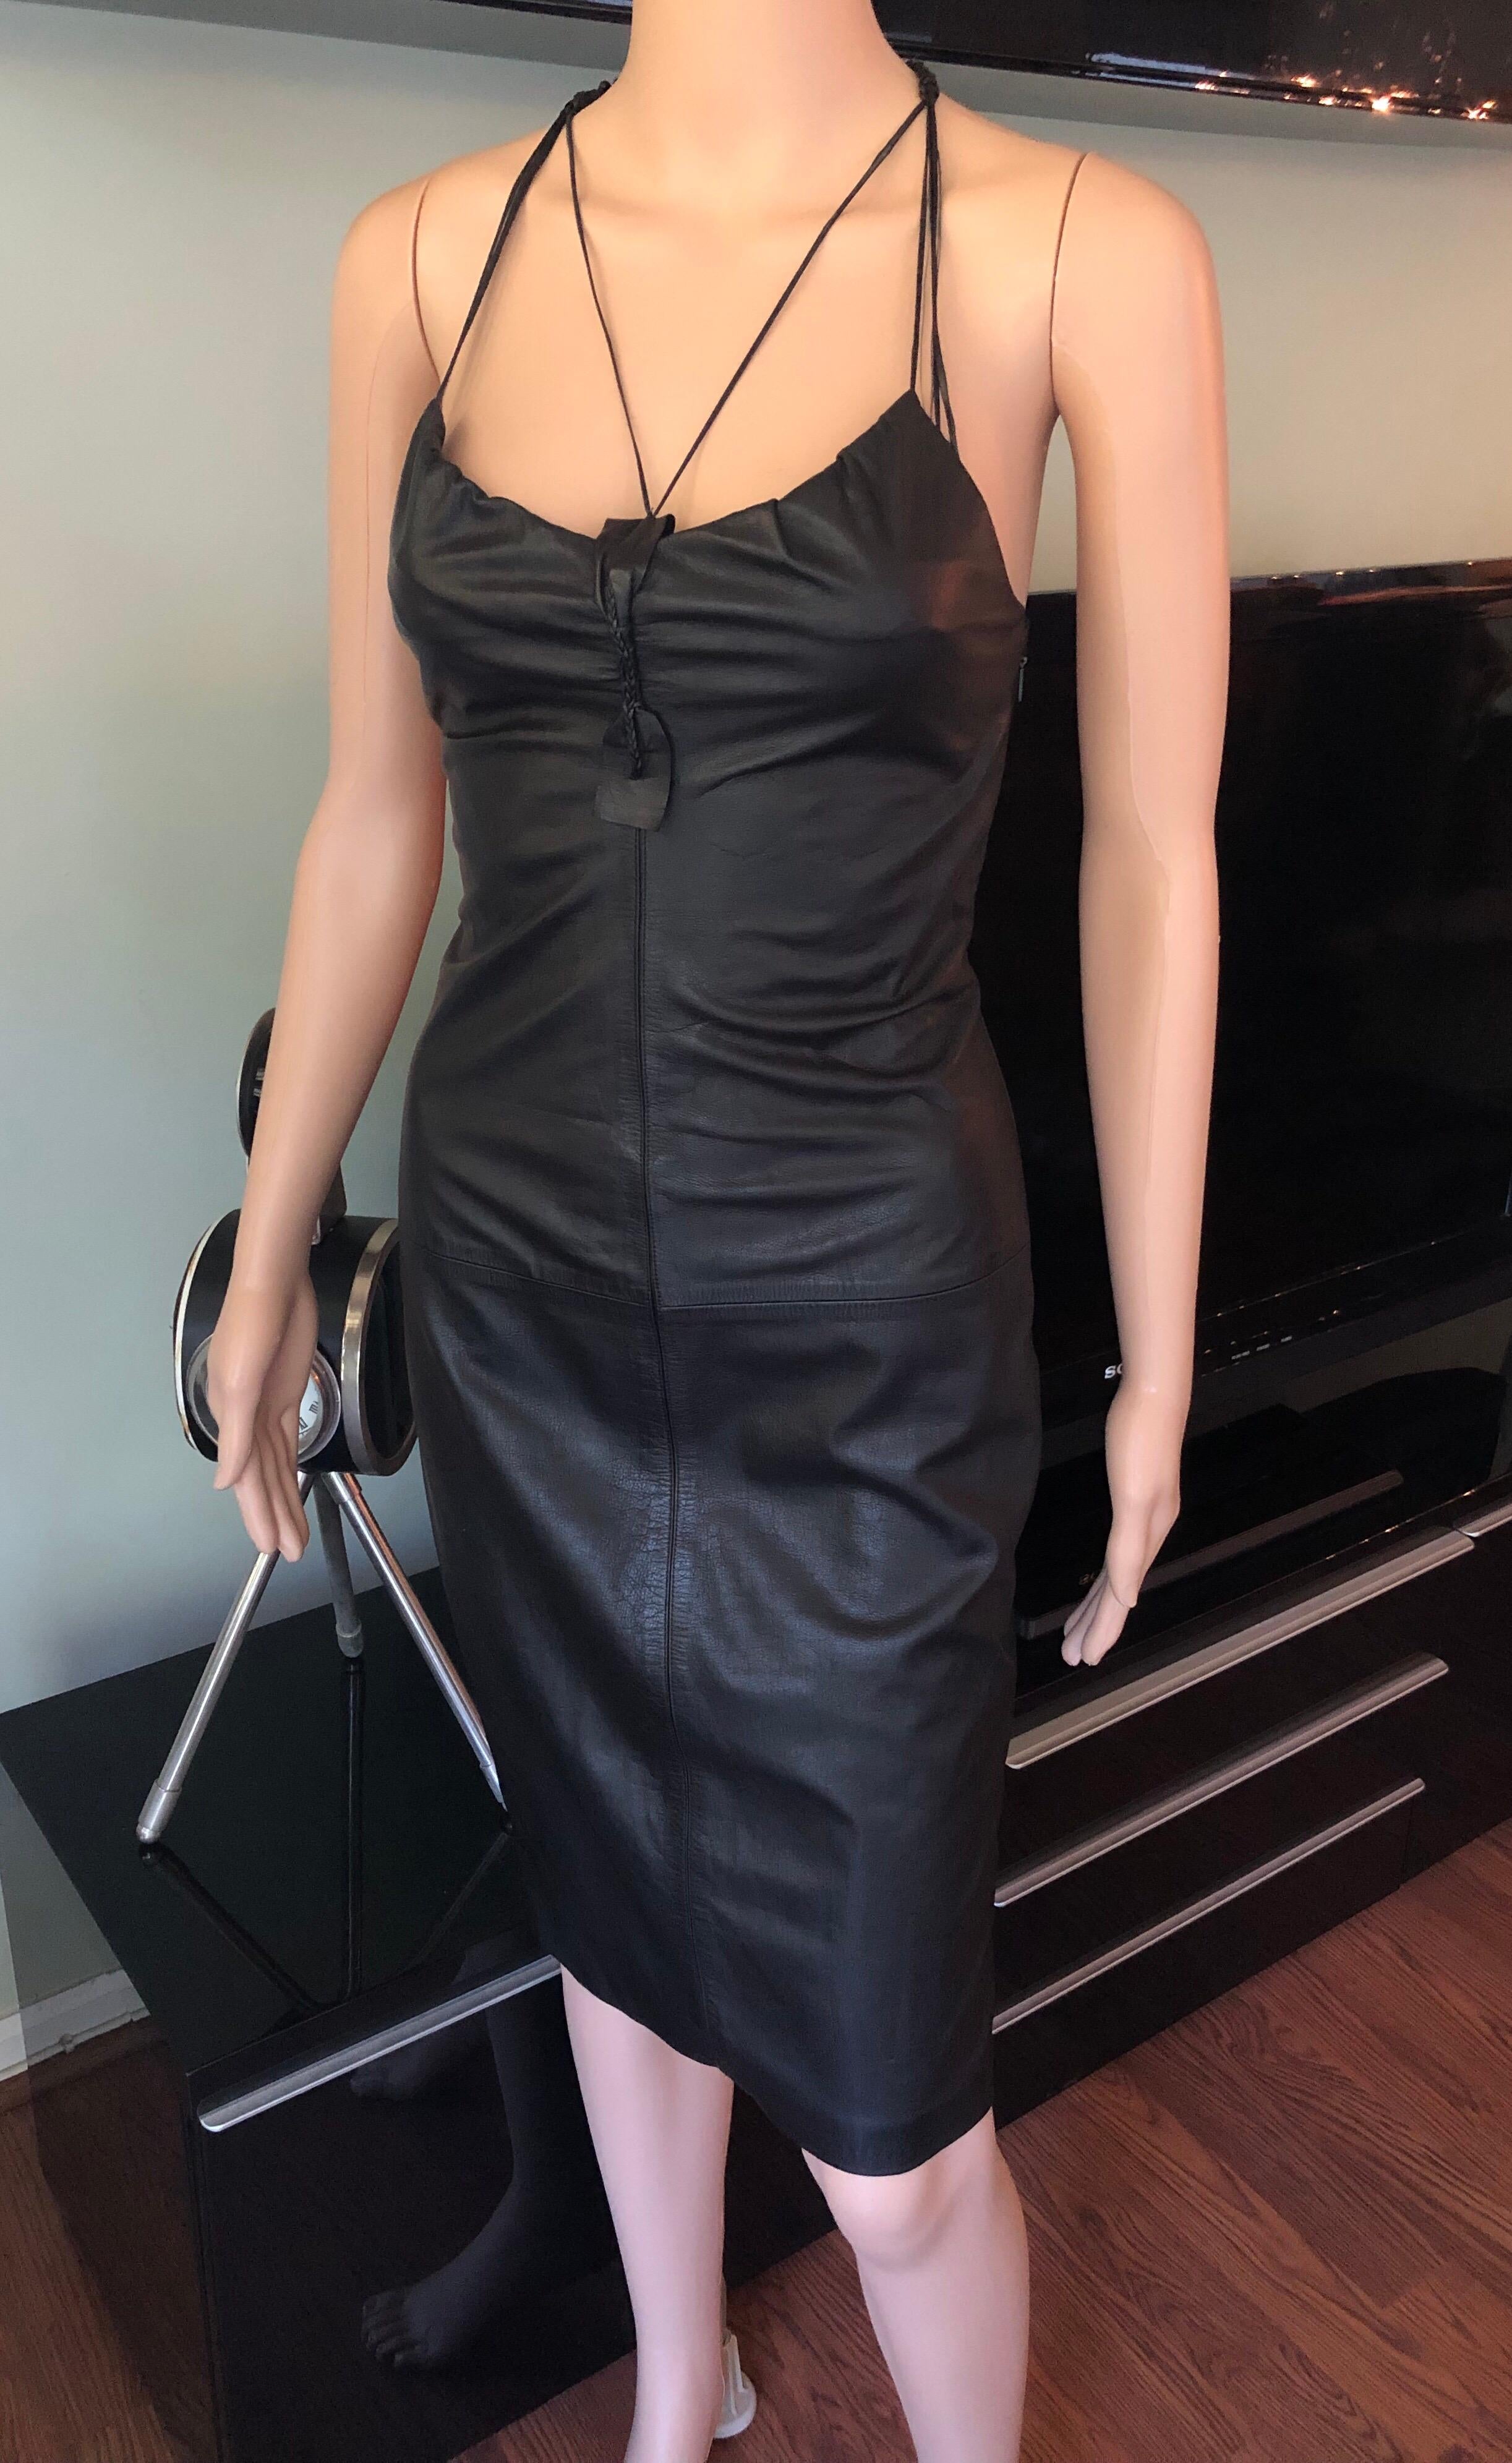 Gucci by Tom Ford S/S 2002 Leather Bustier Dress IT 38

Black Gucci leather sleeveless dress featuring V-neck, low back, slit at hem and concealed zip closure at side.
